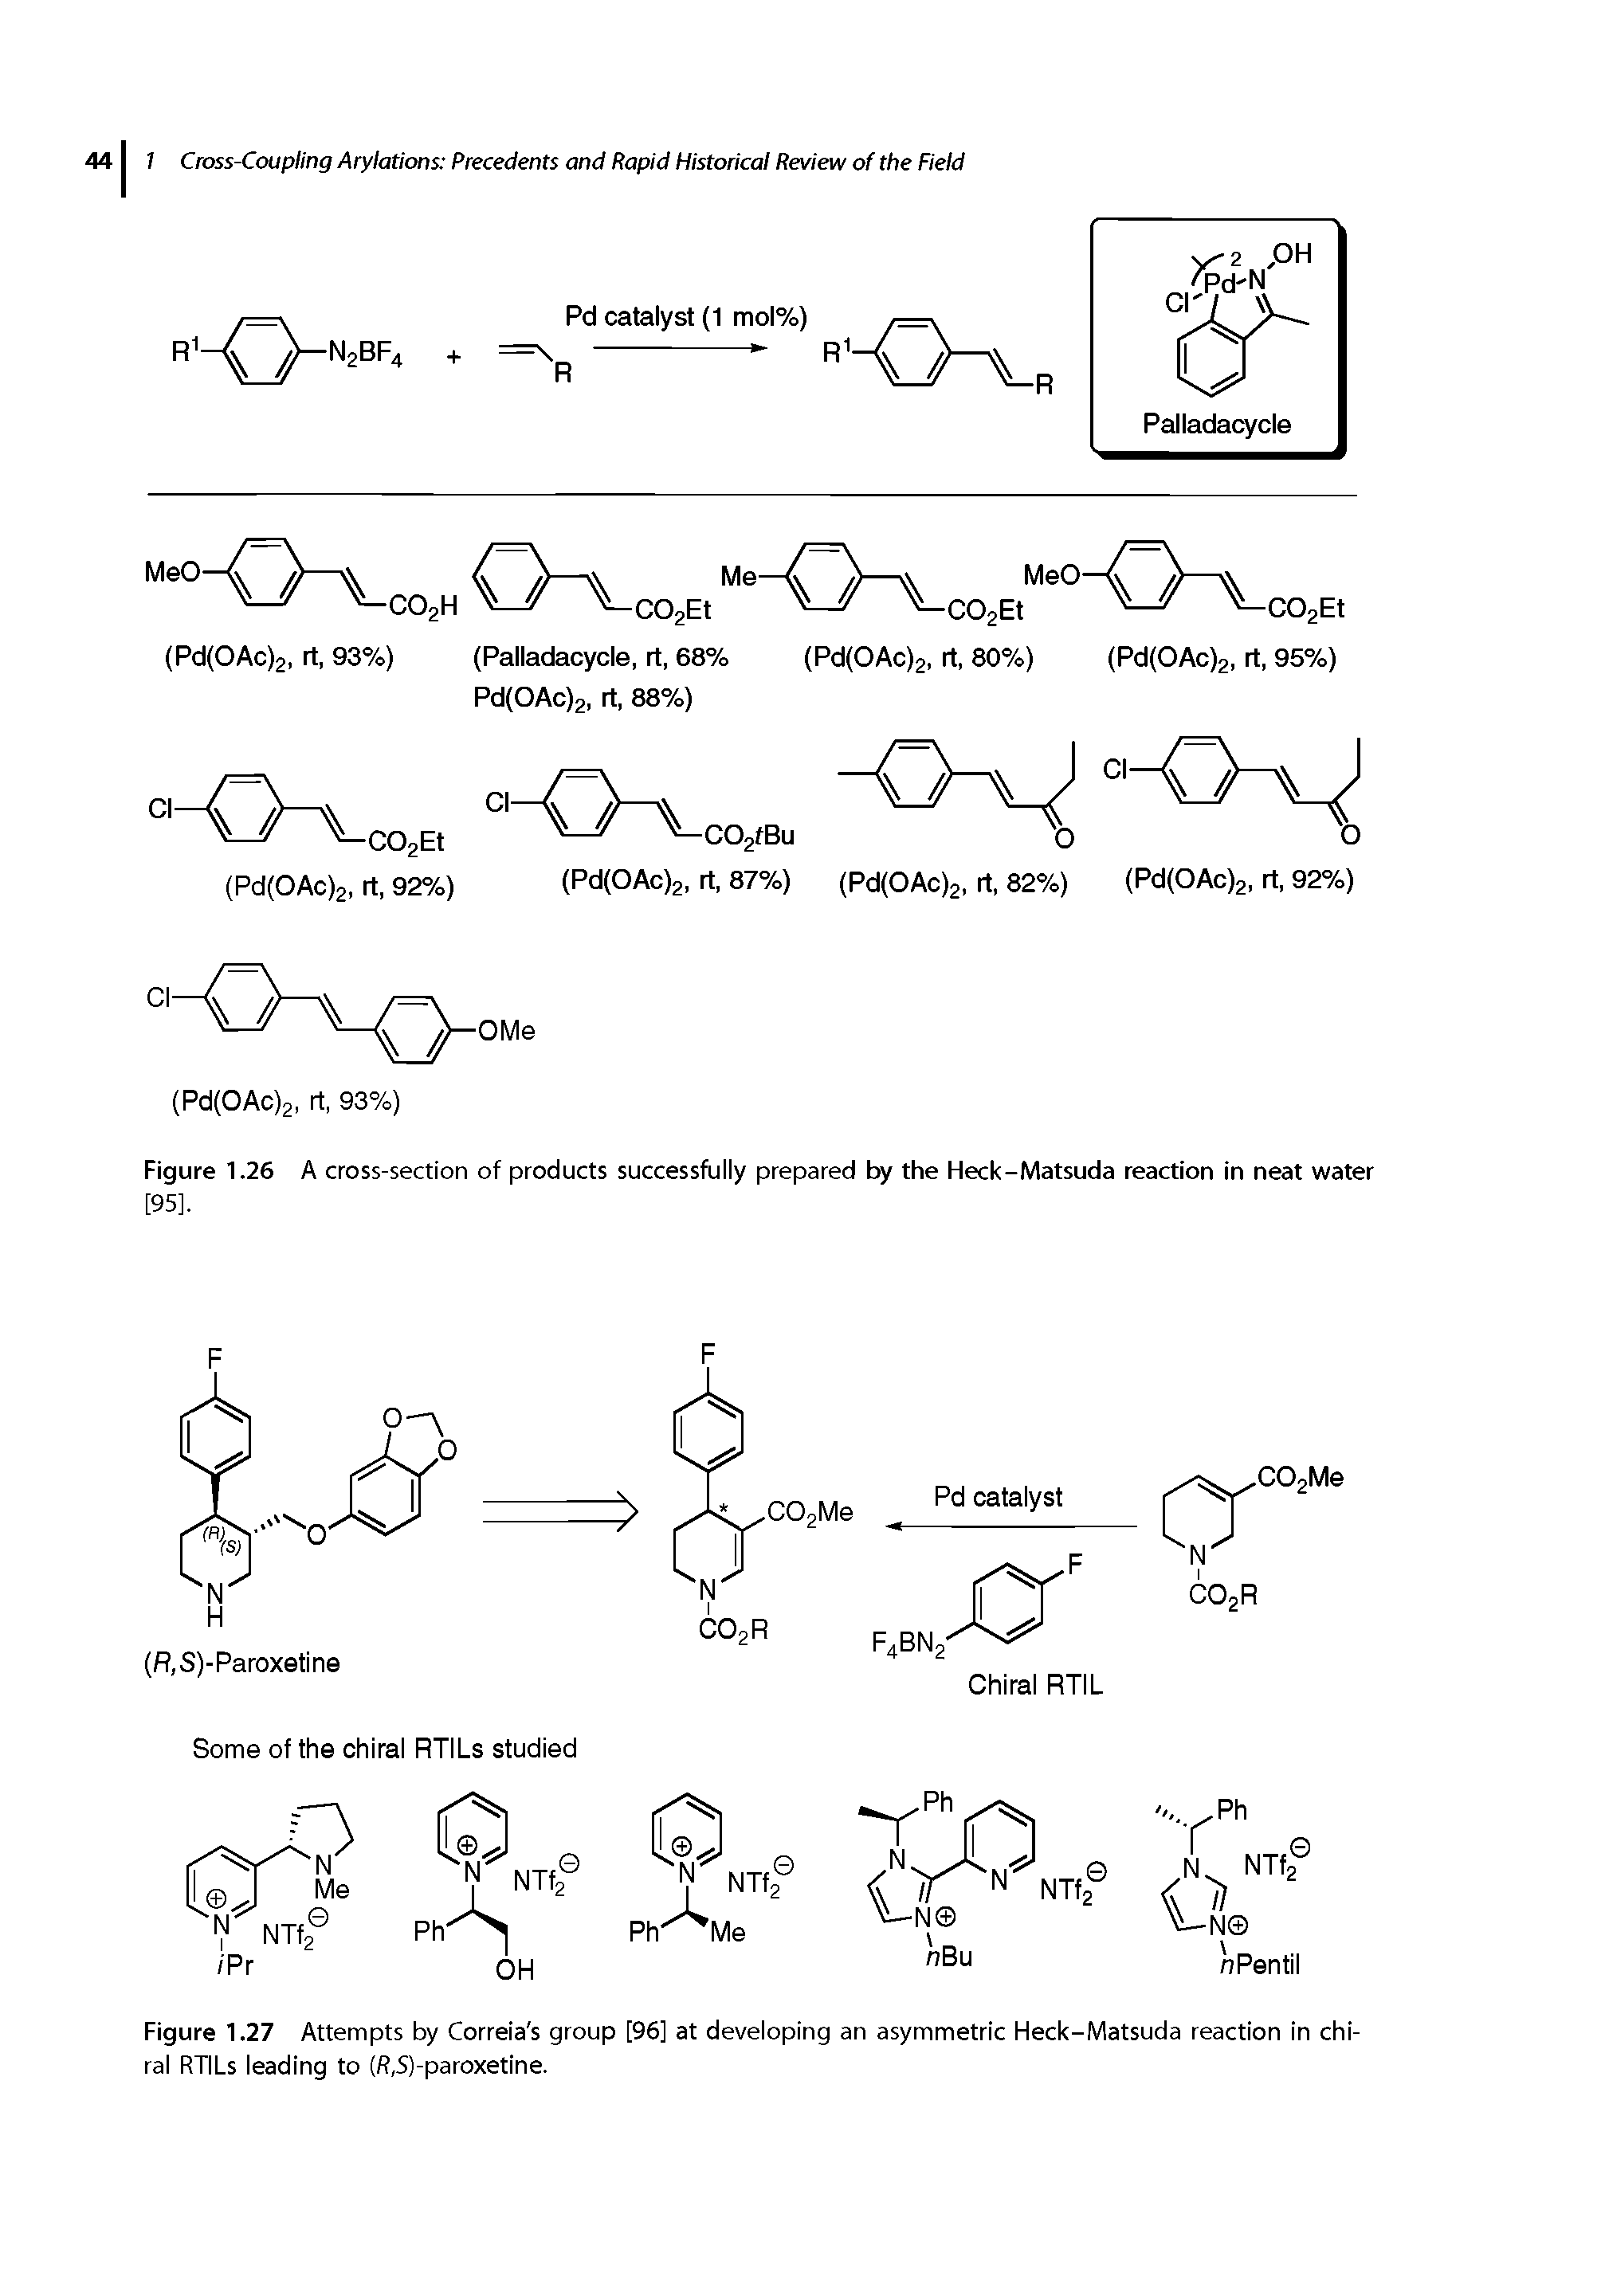 Figure 1.27 Attempts by Correia s group [96] at developing an asymmetric Heck-Matsuda reaction in chiral RTILs leading to (fi,S)-paroxetine.